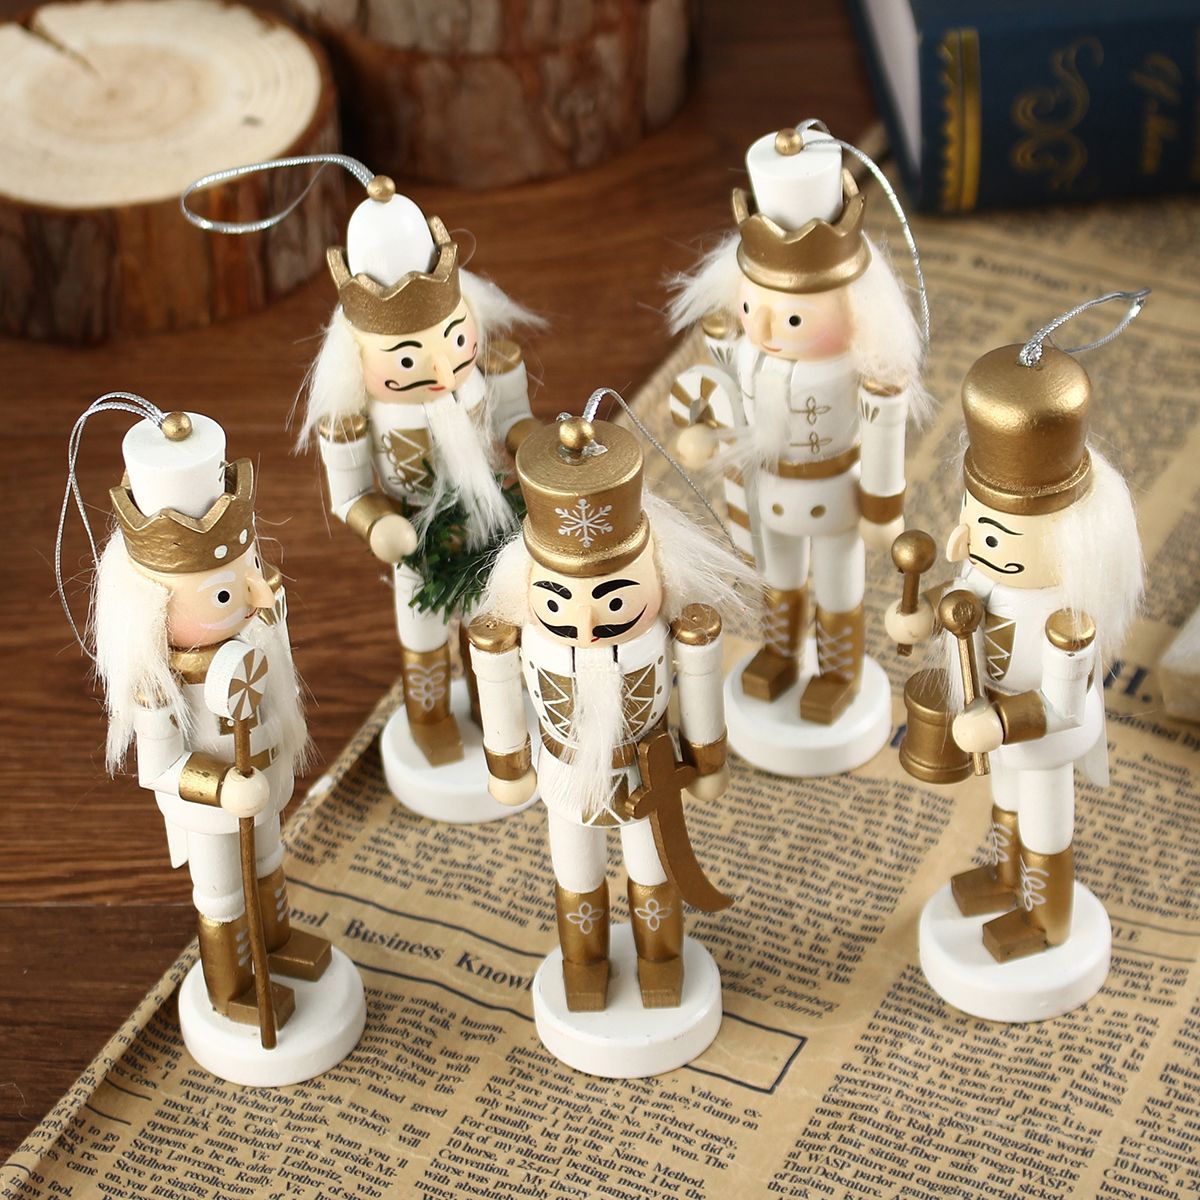 5Pcs-Wooden-Nutcracker-Soldier-Handcraft-Puppet-Doll-Toy-Ornament-Christmas-Gift-Home-Room-Decoratio-1557166